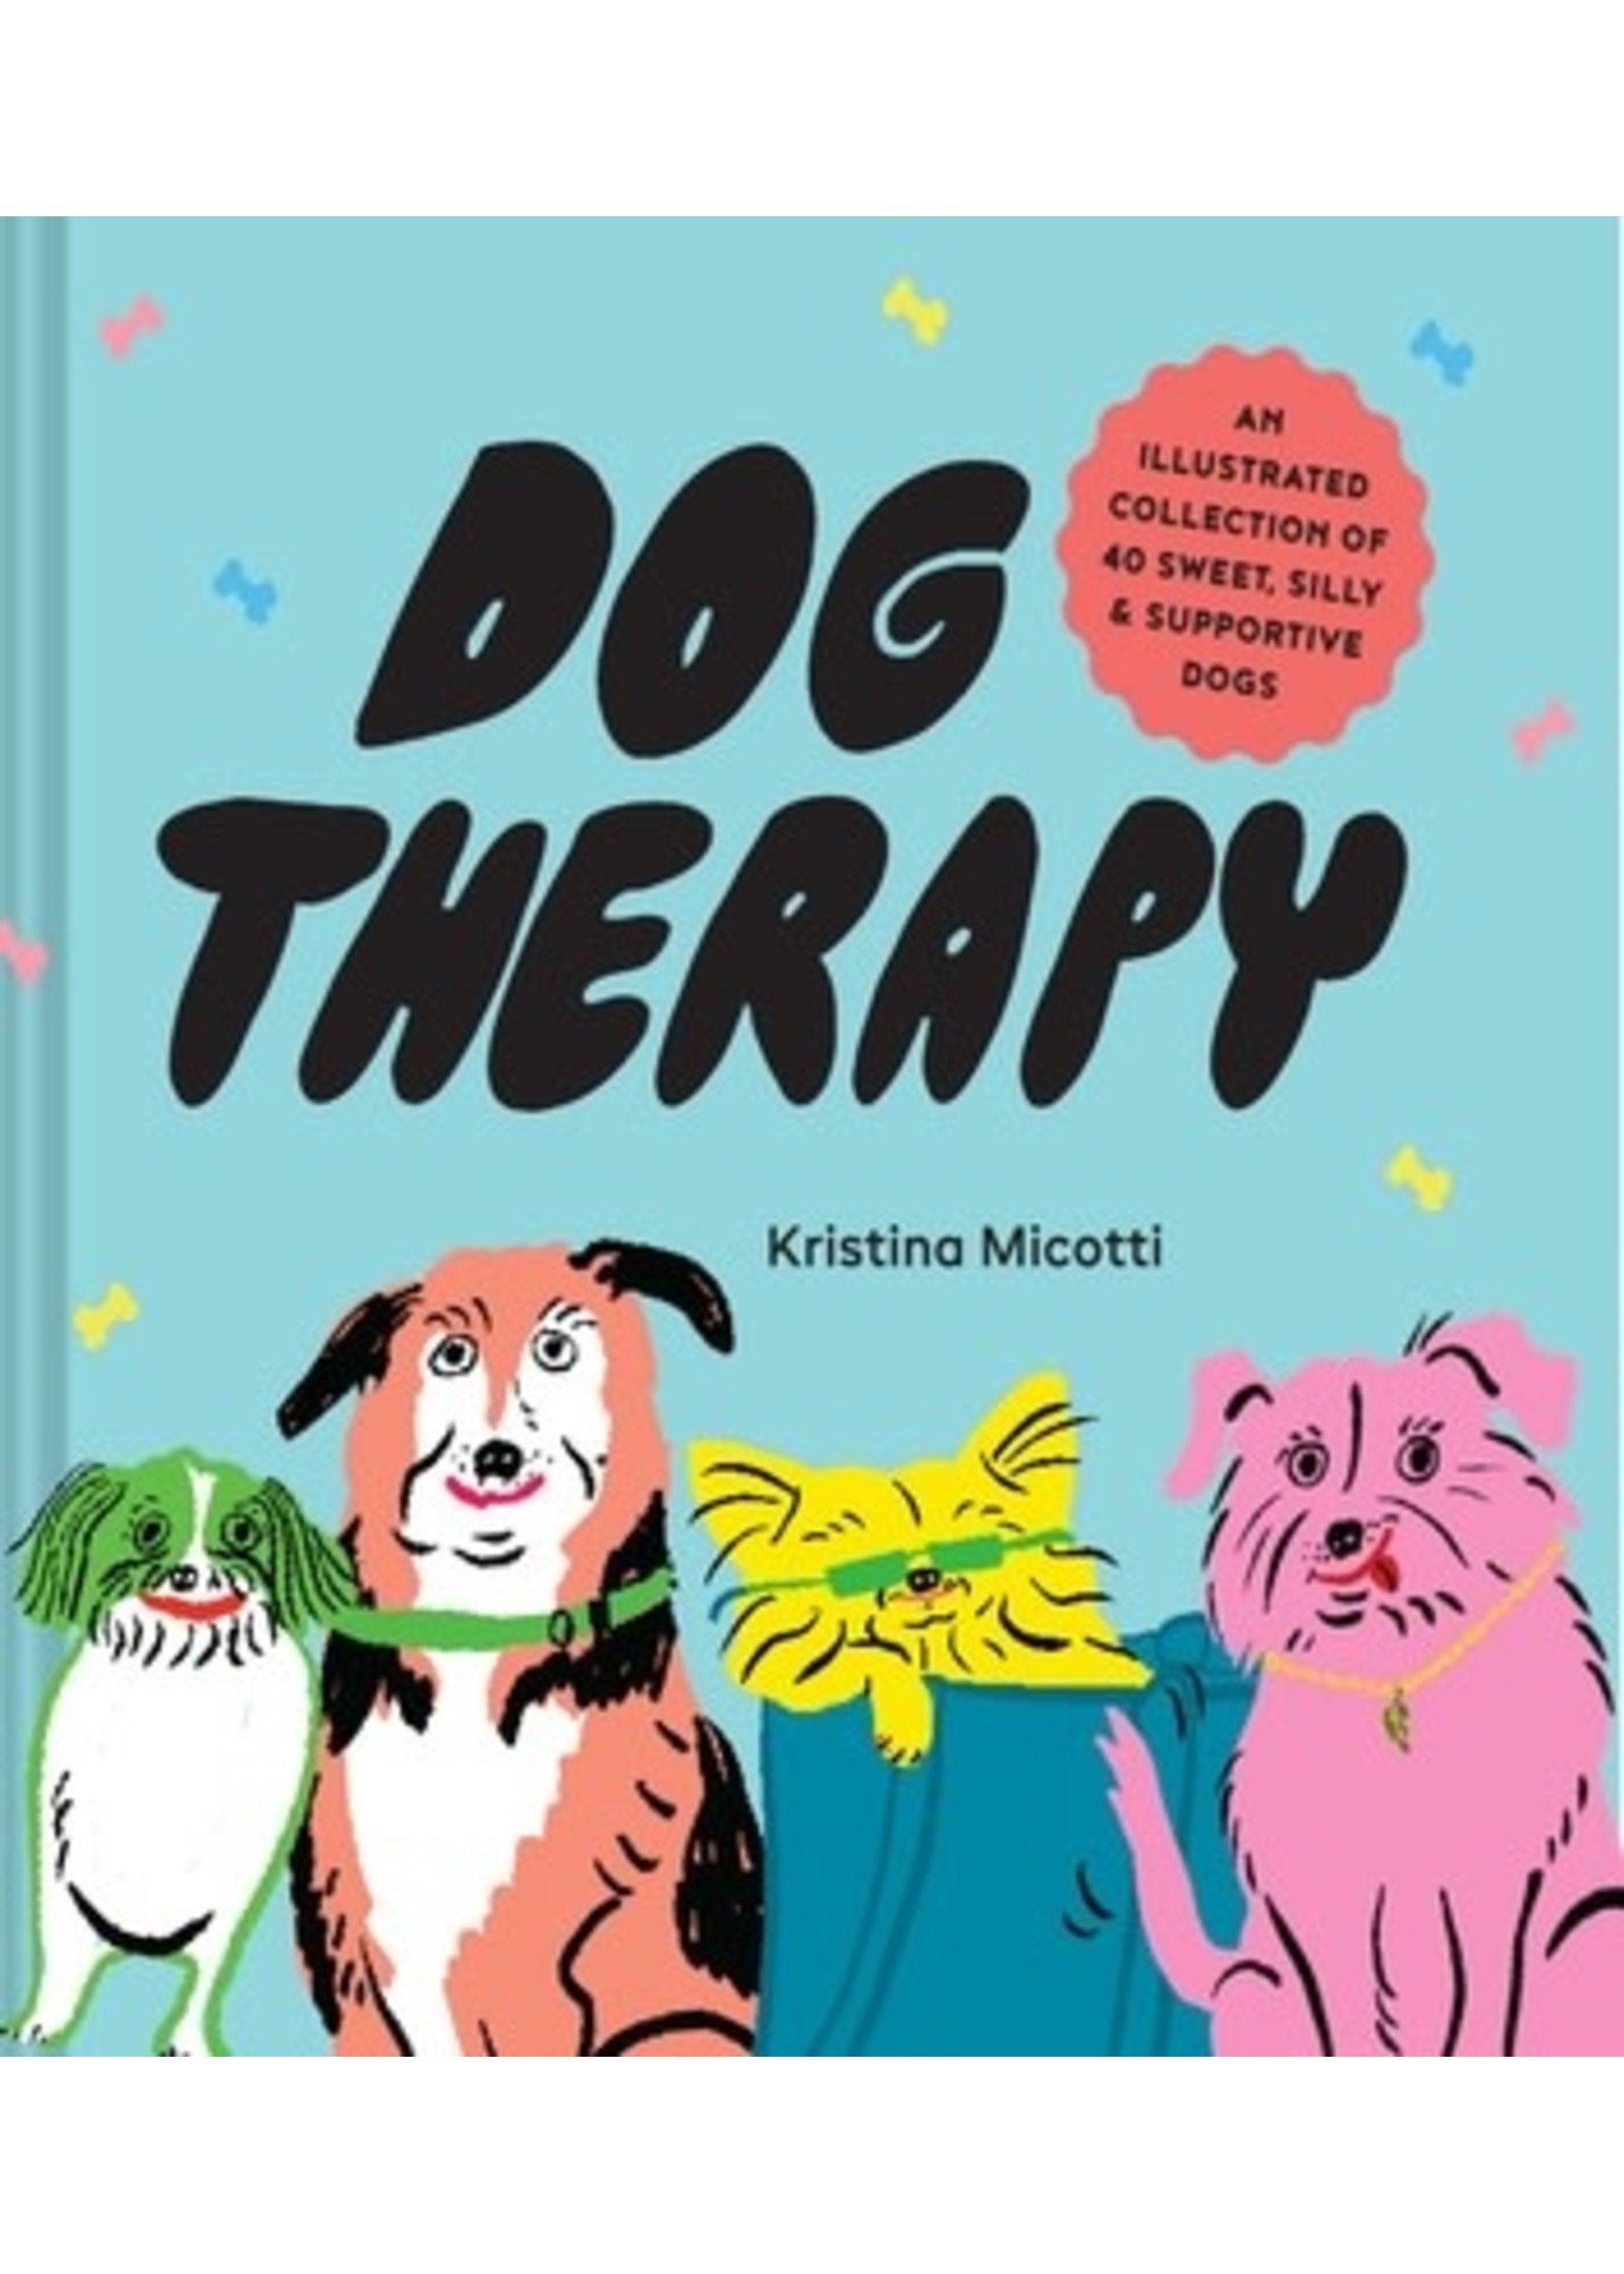 Dog Therapy: An Illustrated Collection of 40 Sweet, Silly, and Supportive Dogs by Kristina Micotti